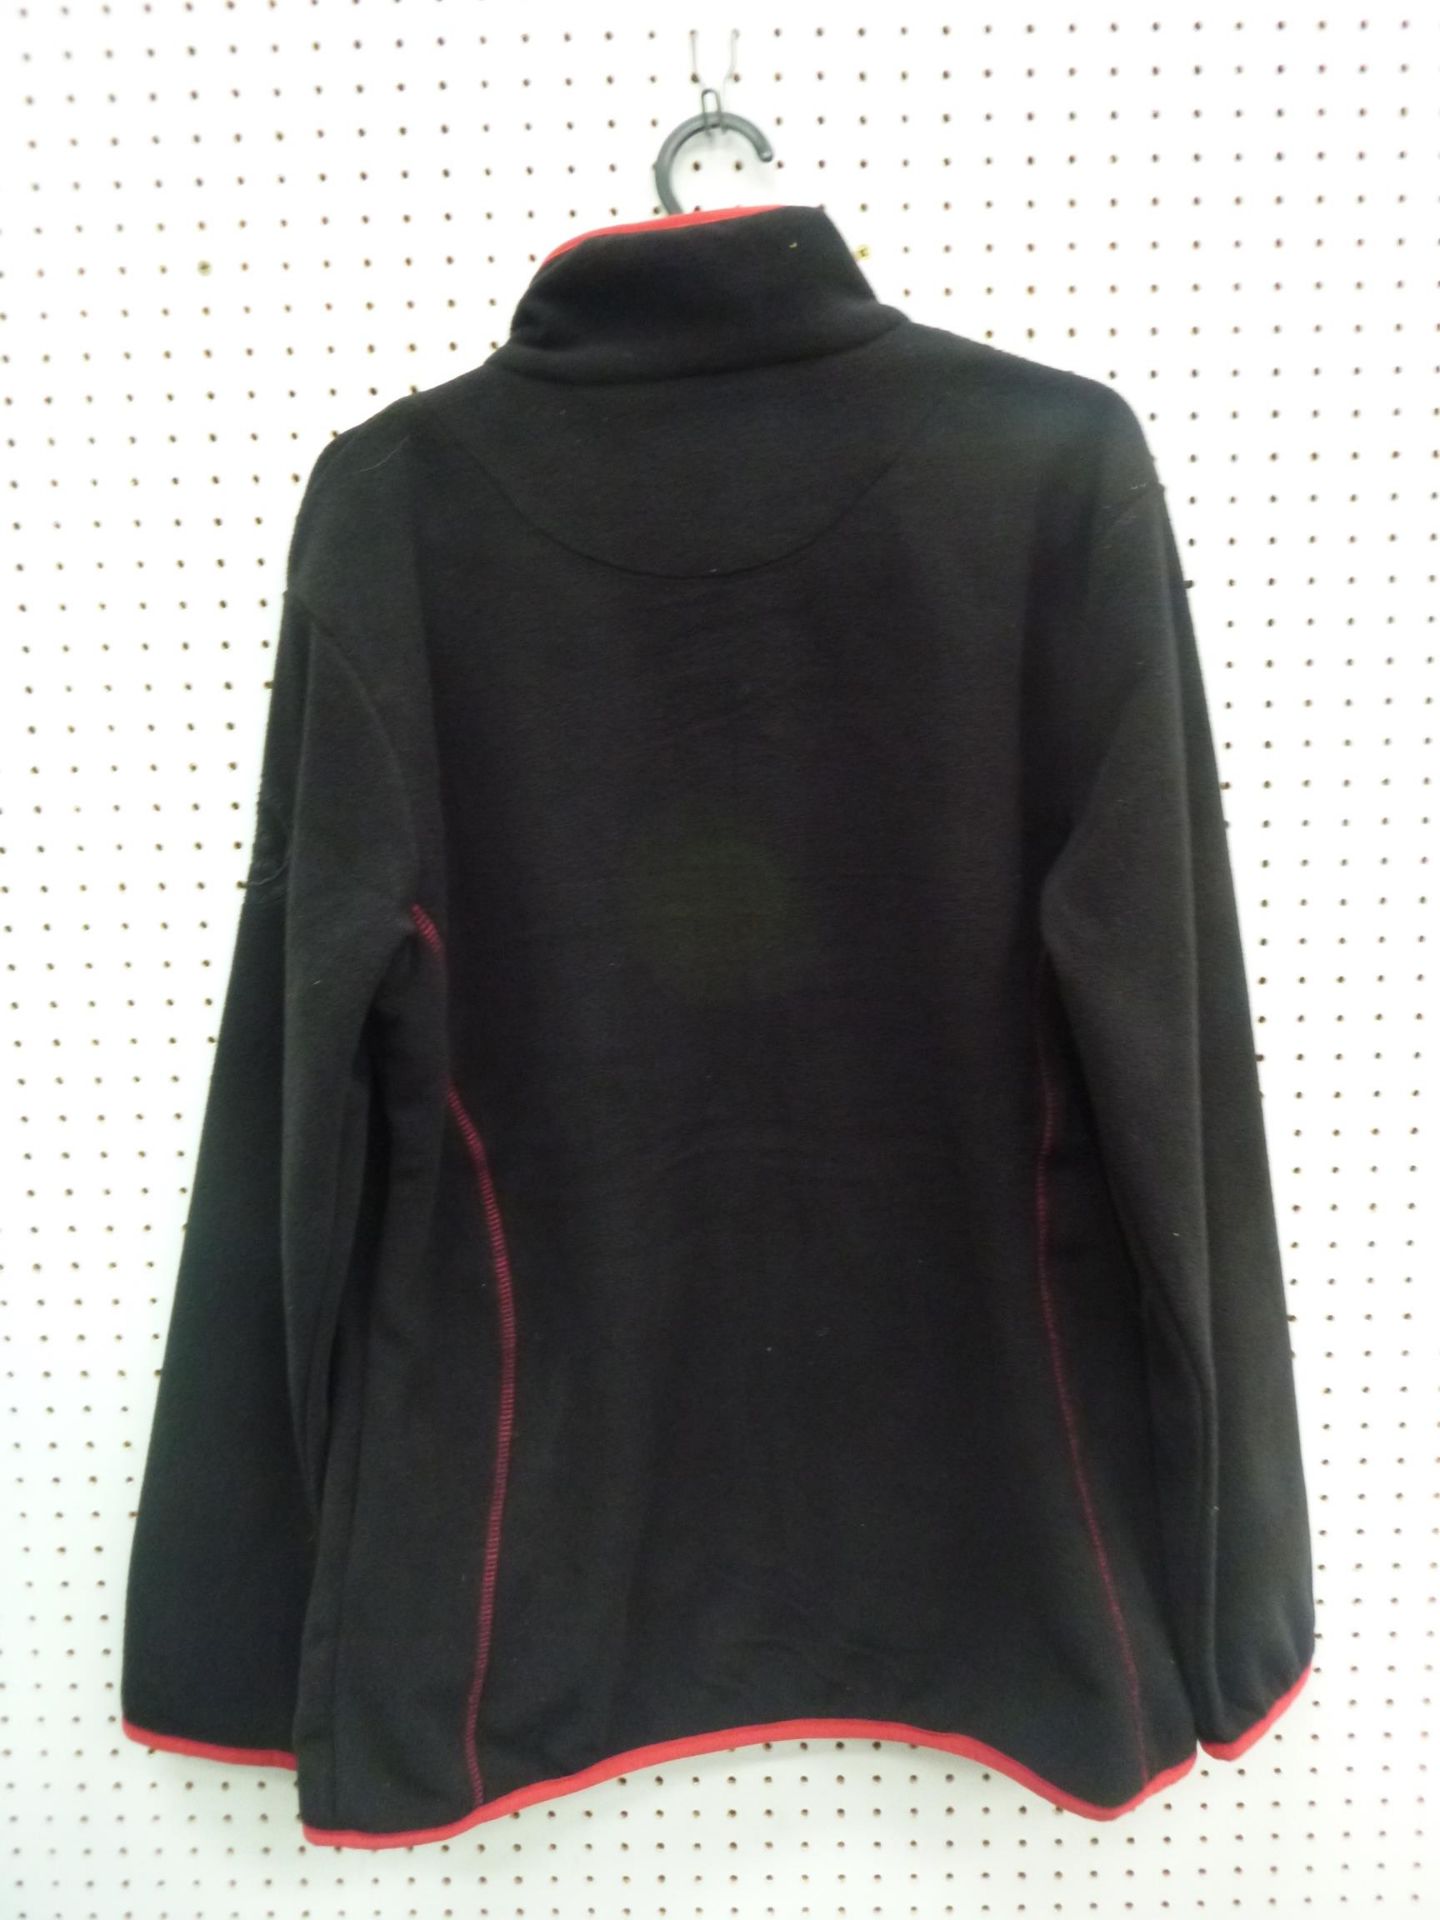 * Two New 'Bridleway' Micro Fleece Jackets, a Small in Black/Red and a Large in Red/Grey RRP £49. - Image 4 of 4